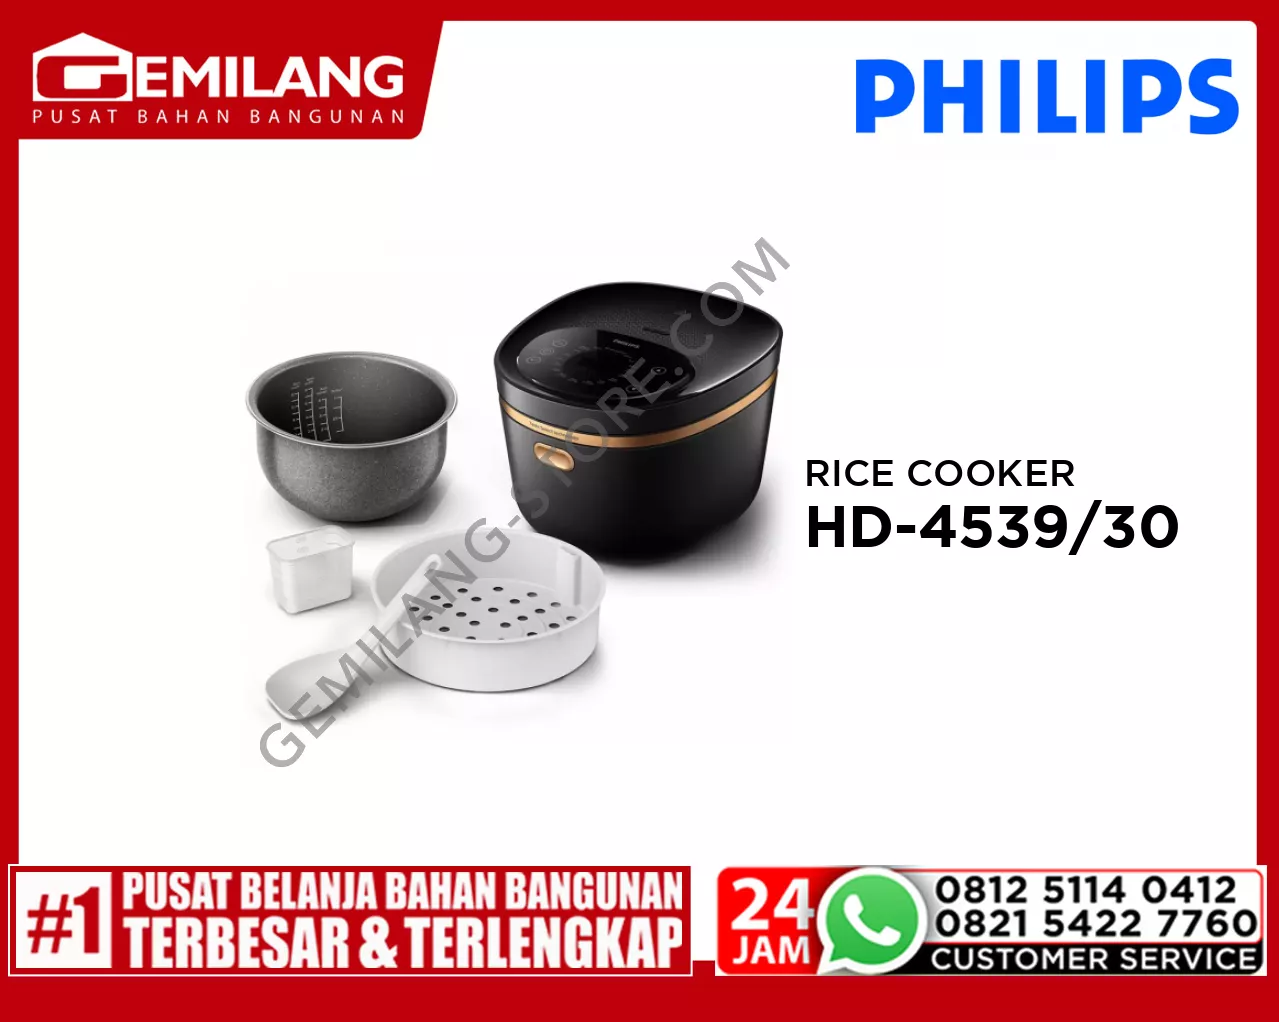 PHILIPS RICE COOKER HD-4539/30